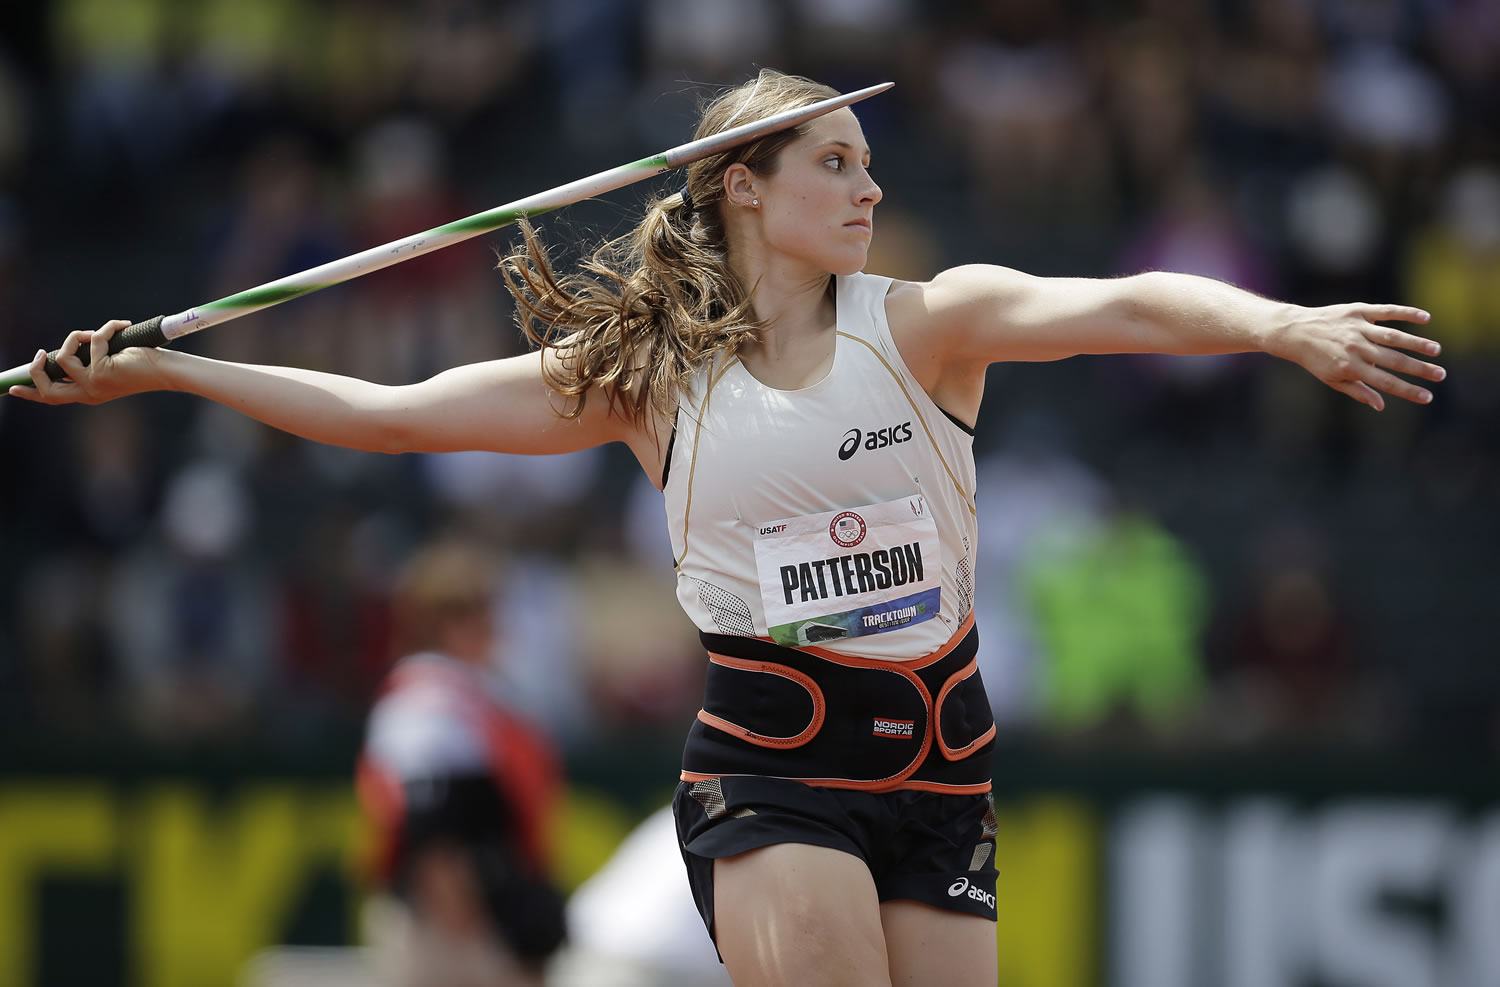 Kara Patterson placed second in the javelin at the U.S.